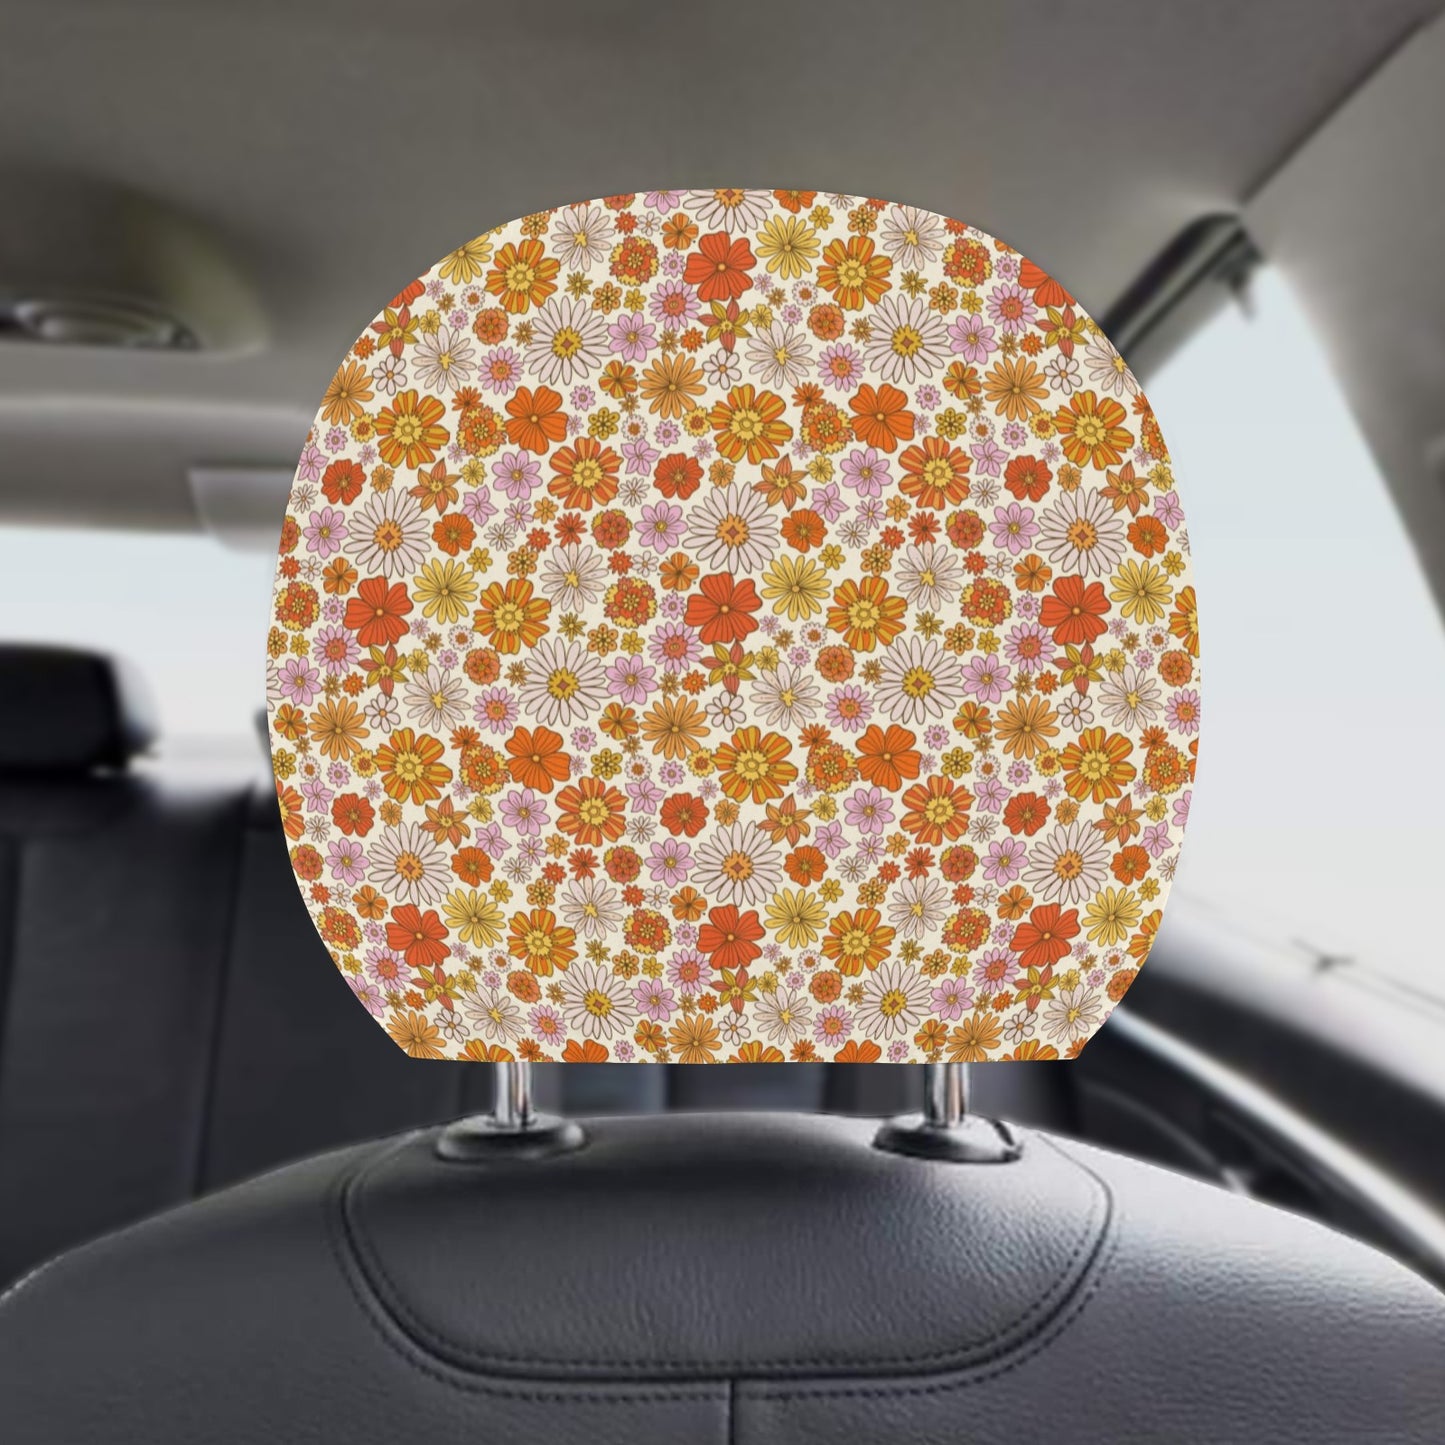 Groovy Flowers Car Seat Headrest Cover (2pcs), Vintage Floral 70s Truck Suv Van Vehicle Auto Decoration Protector New Car Gift Starcove Fashion